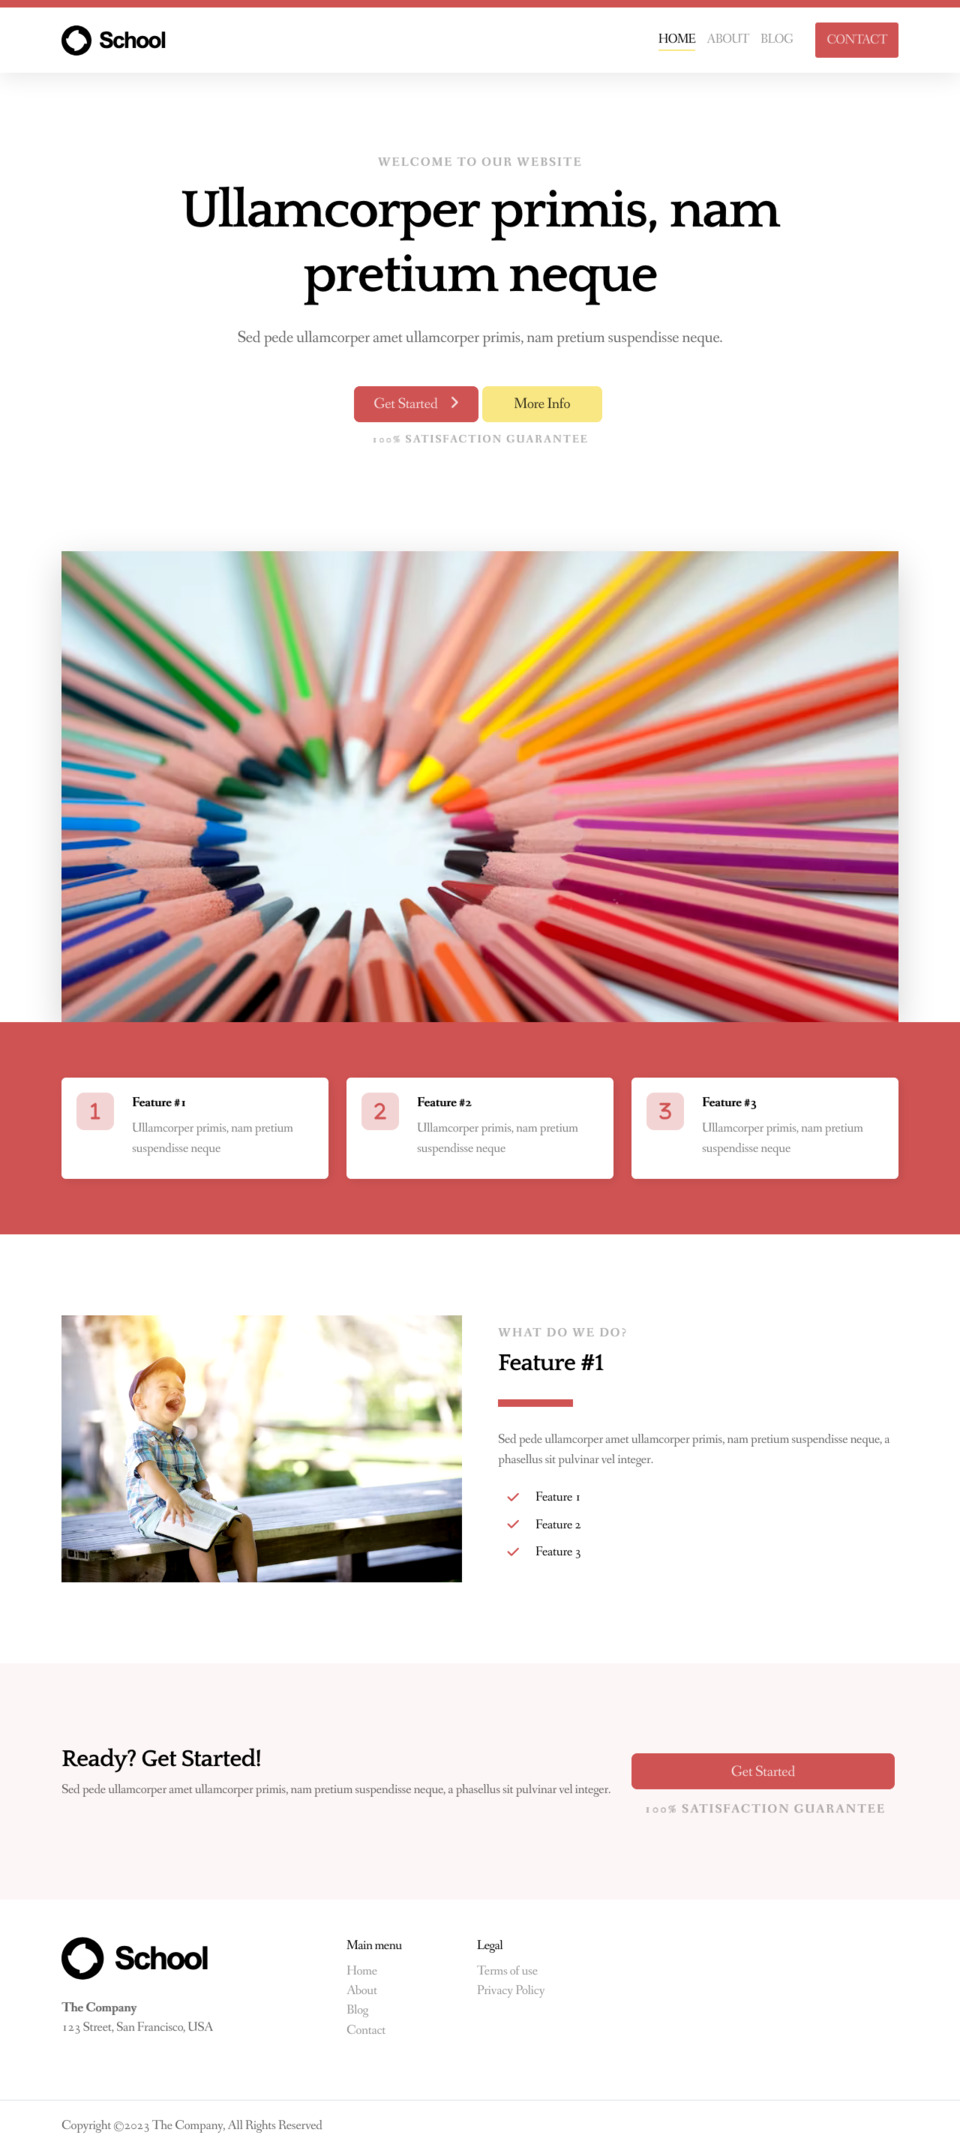 School Website Template - Ideal for schools, education centers, learning institutions, kindergartens, elementary schools, middle schools, high schools, language schools, and any educational organization.